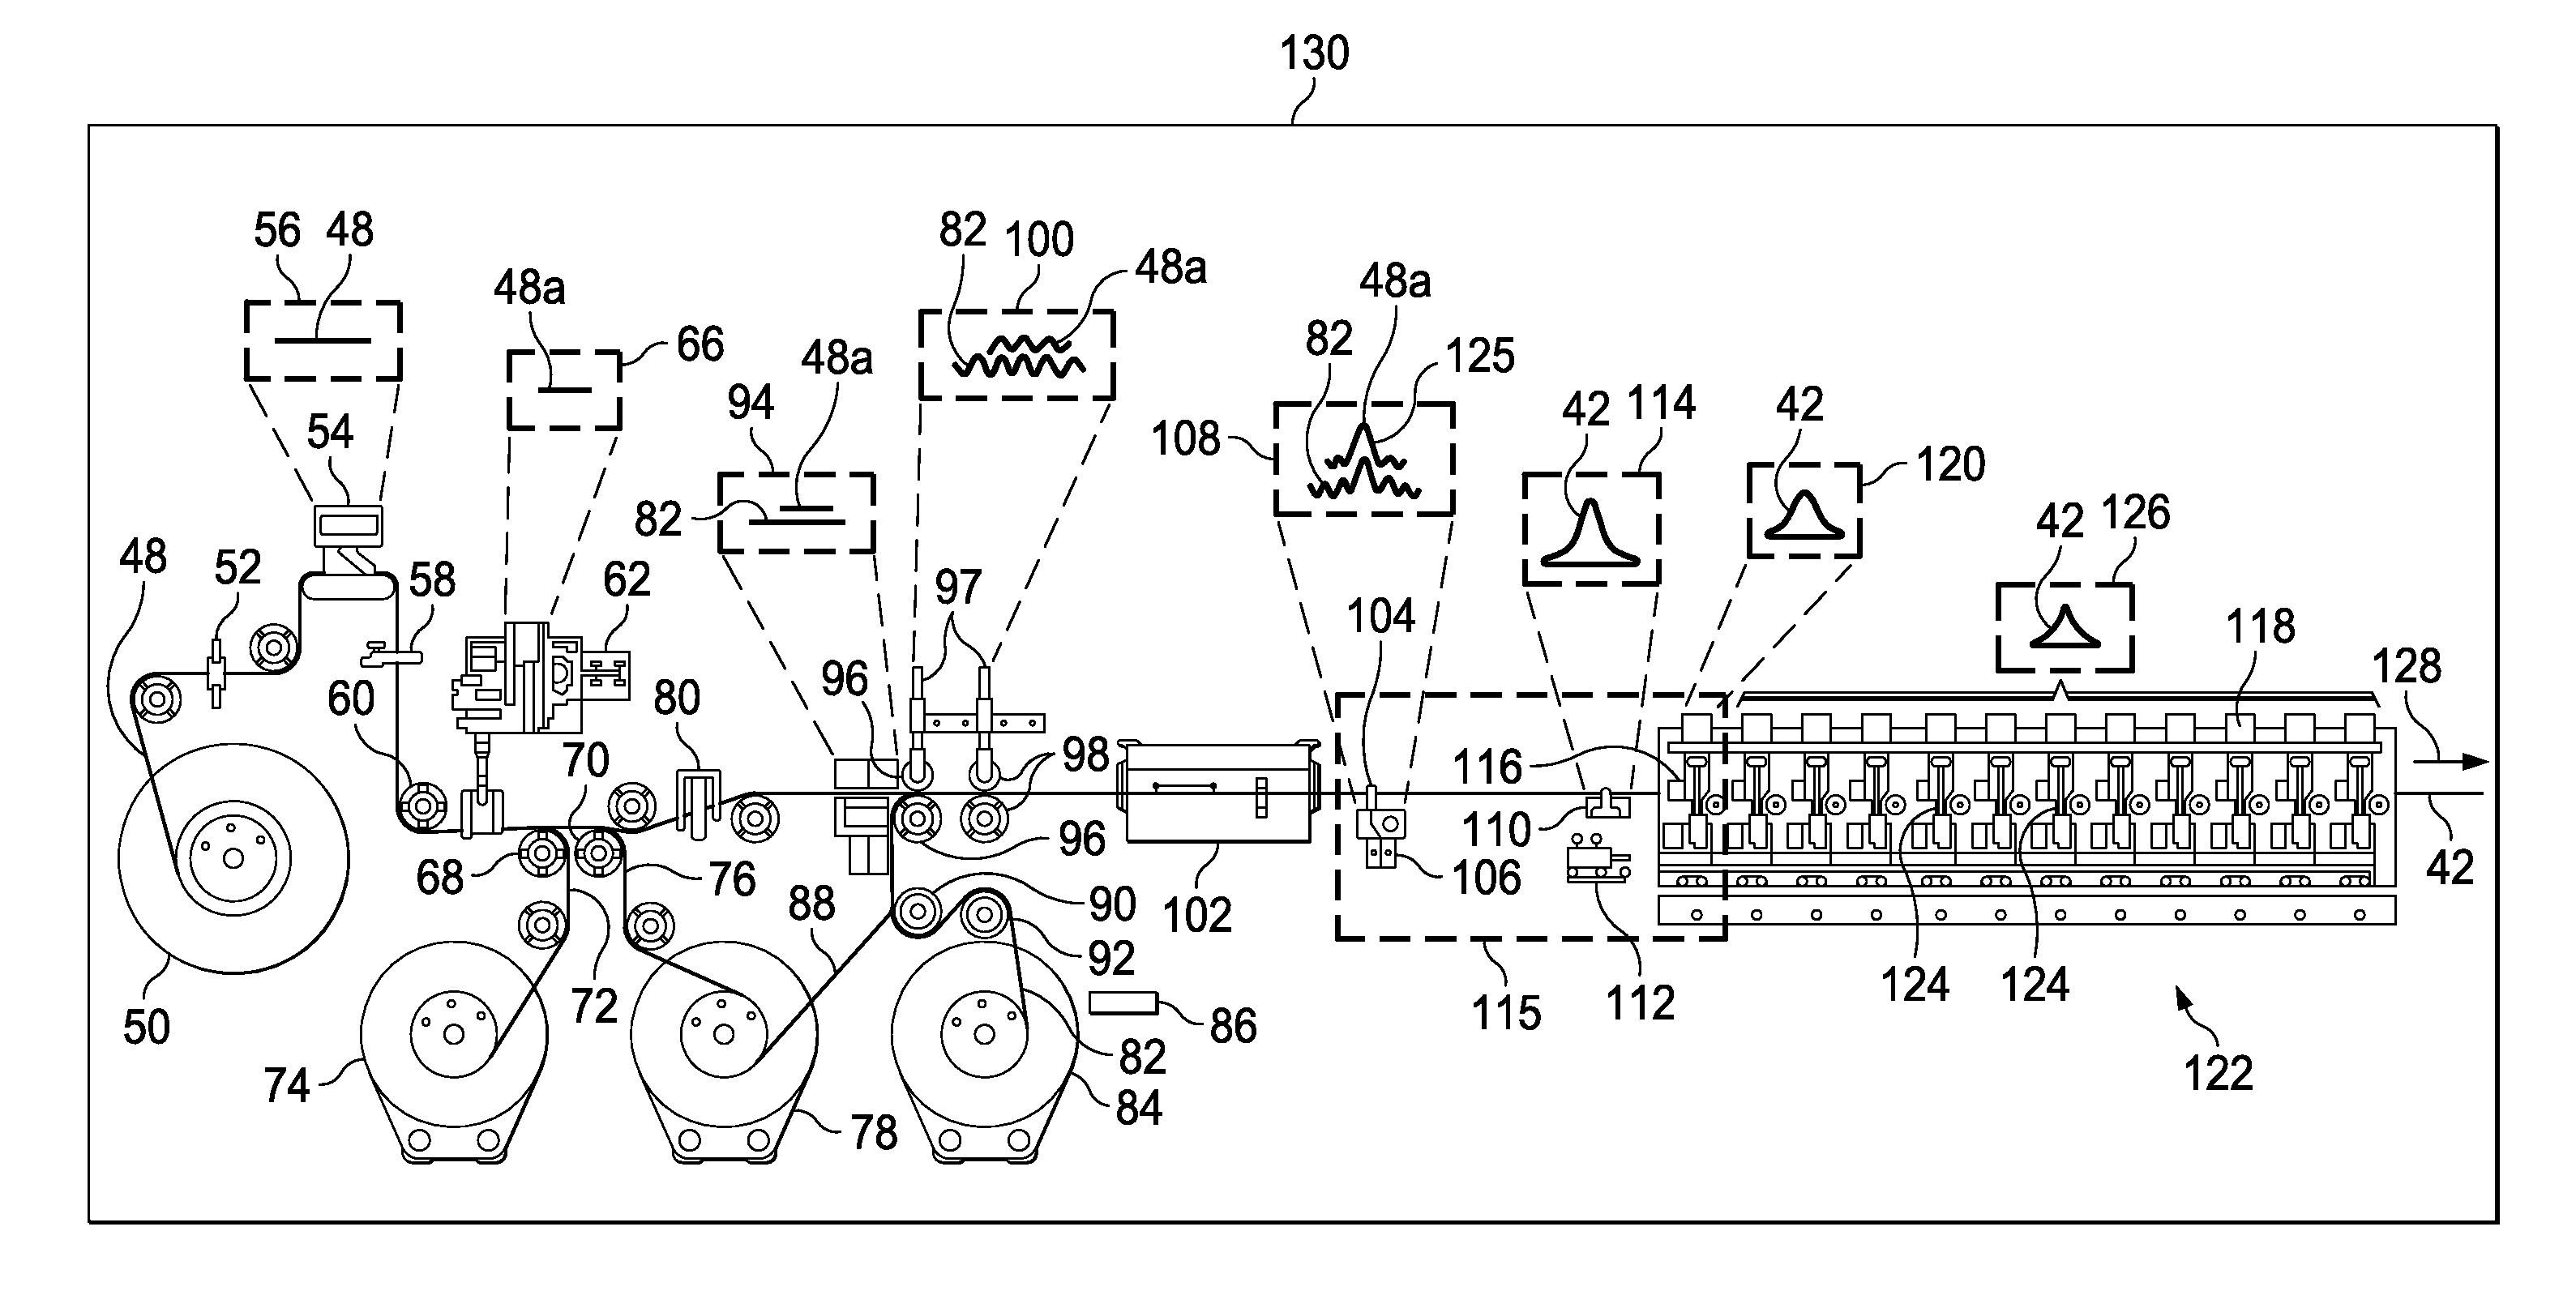 Automated fabrication of composite fillers